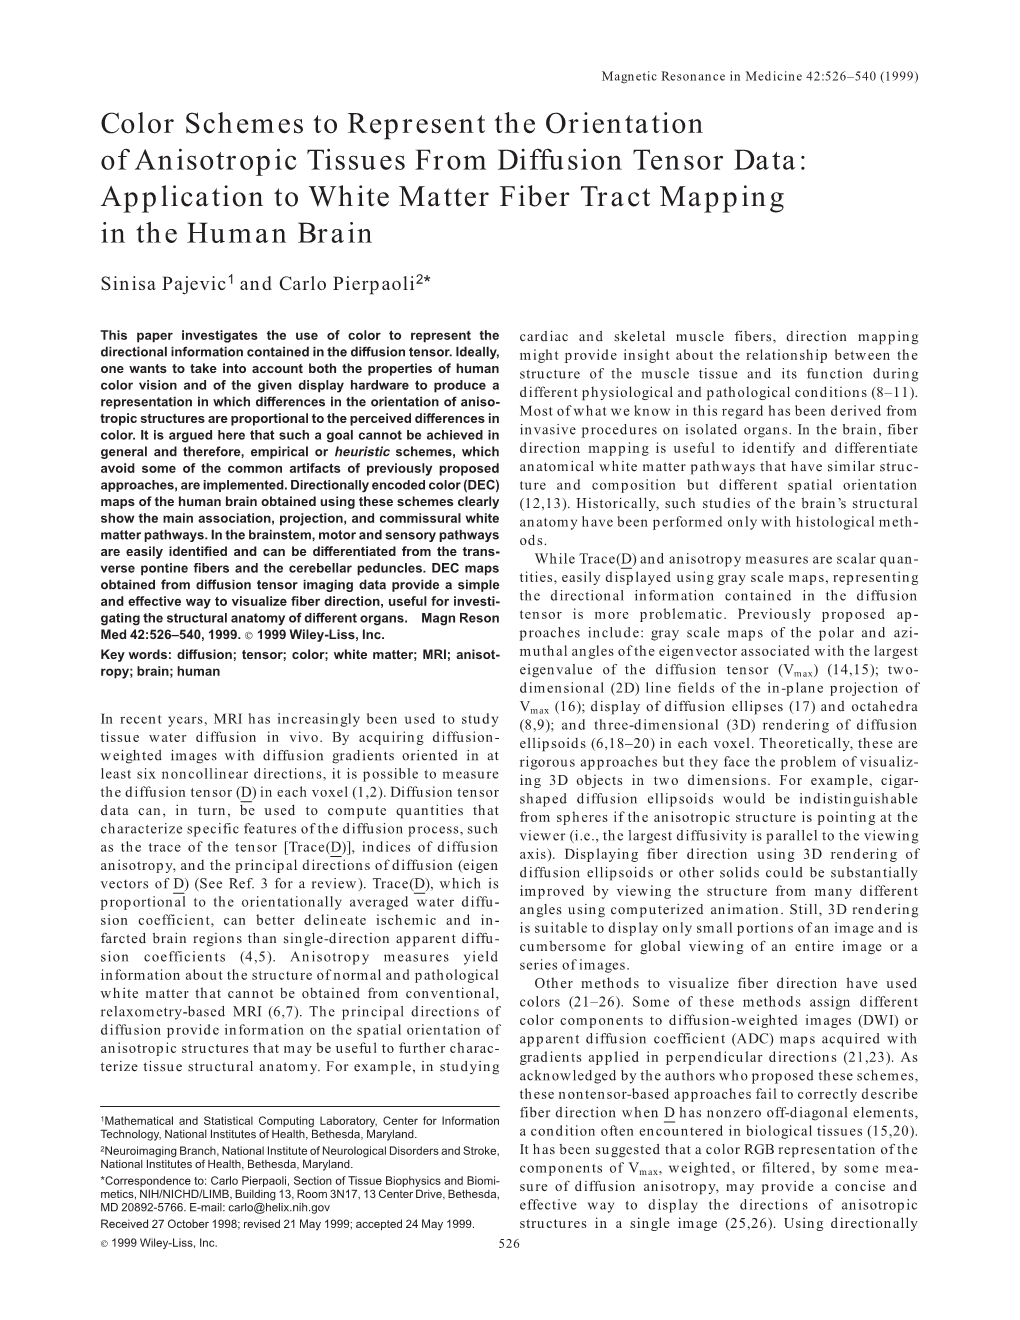 Color Schemes to Represent the Orientation of Anisotropic Tissues from Diffusion Tensor Data: Application to White Matter Fiber Tract Mapping in the Human Brain